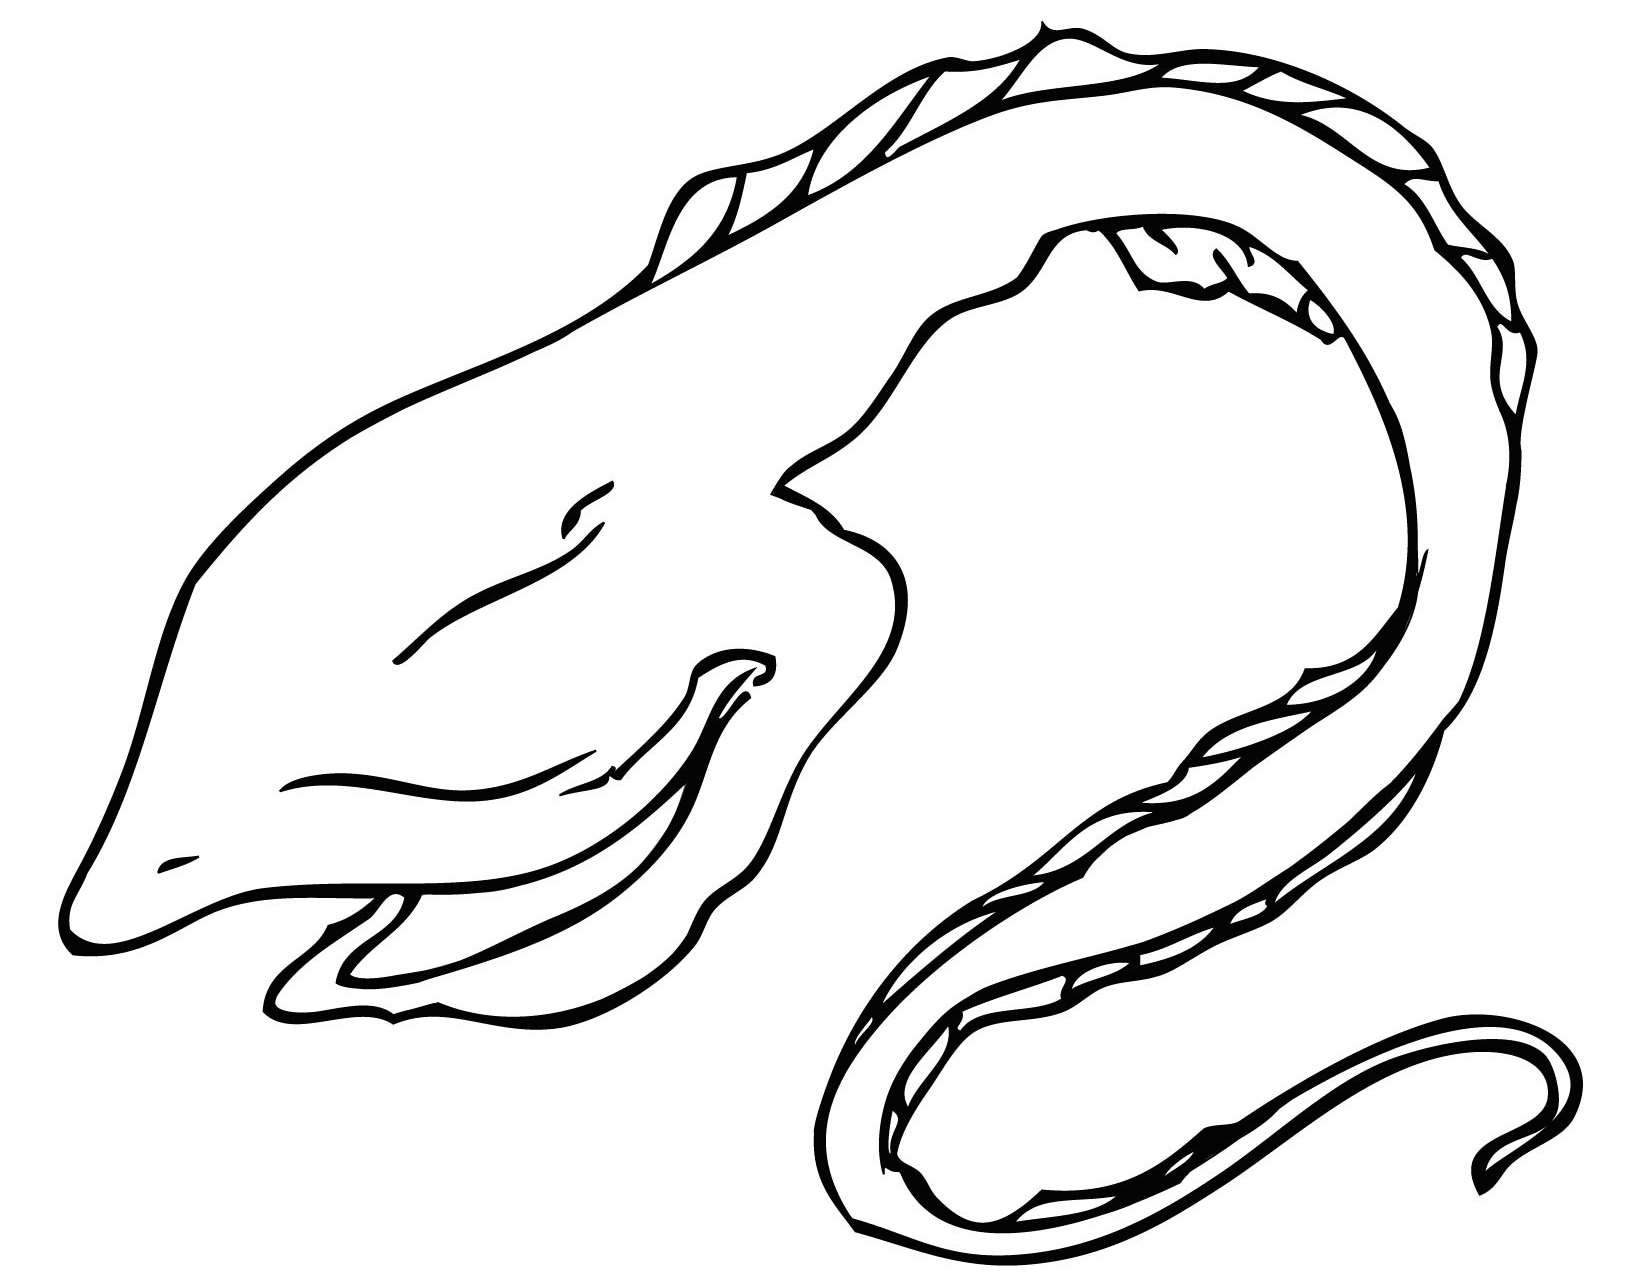 Eel Coloring Pages Printable Coloring Pages